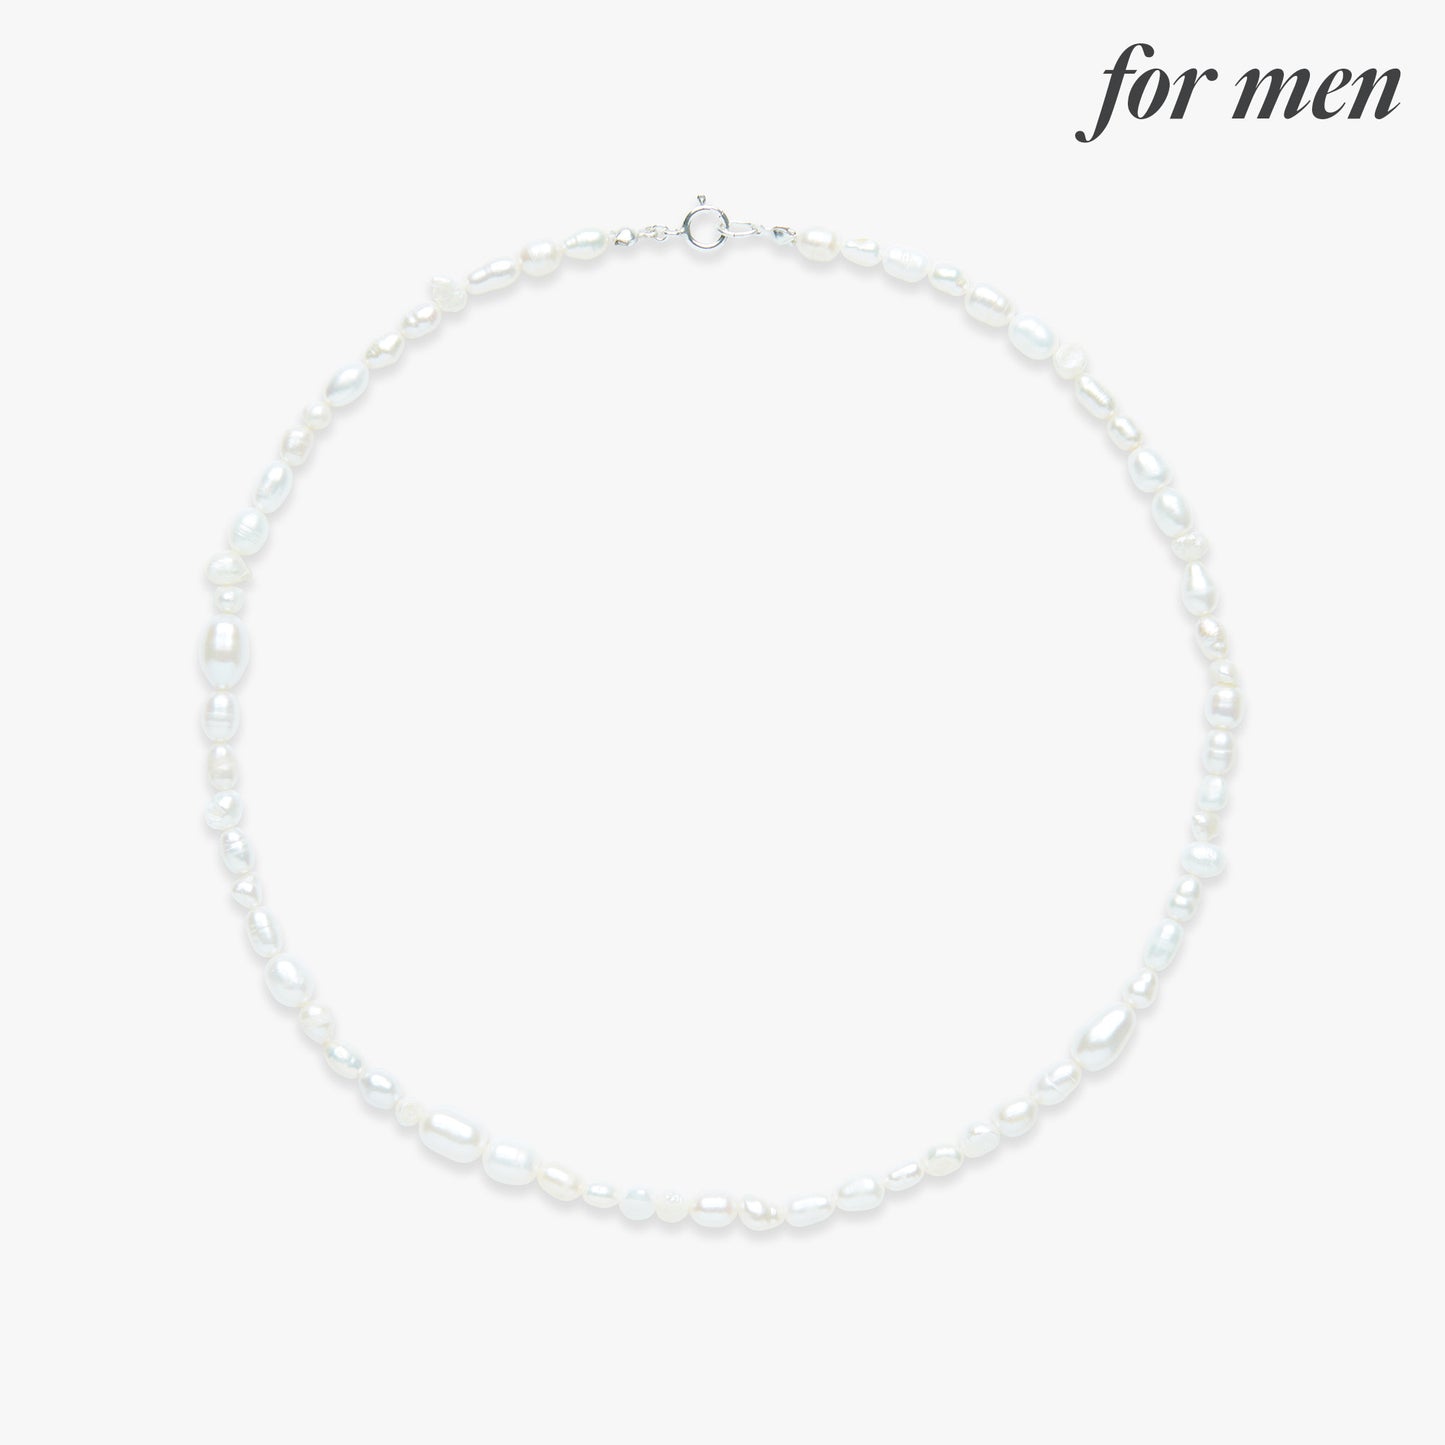 Stitch pearl necklace silver for men